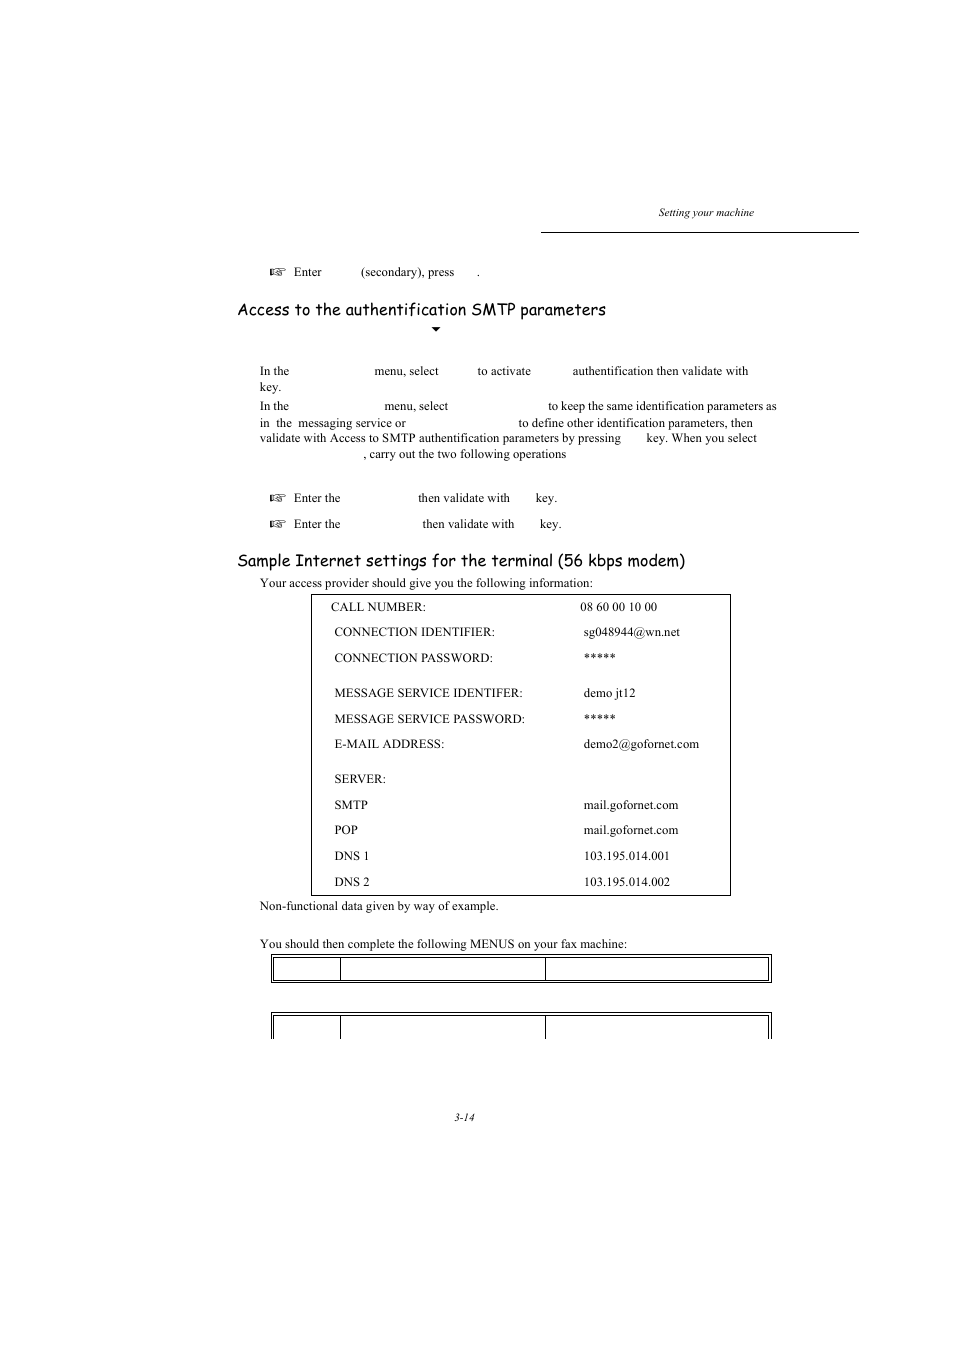 P. 3-14, Access to the authentification smtp parameters, Connection | TA Triumph-Adler MFP 980 User Manual | Page 51 / 125